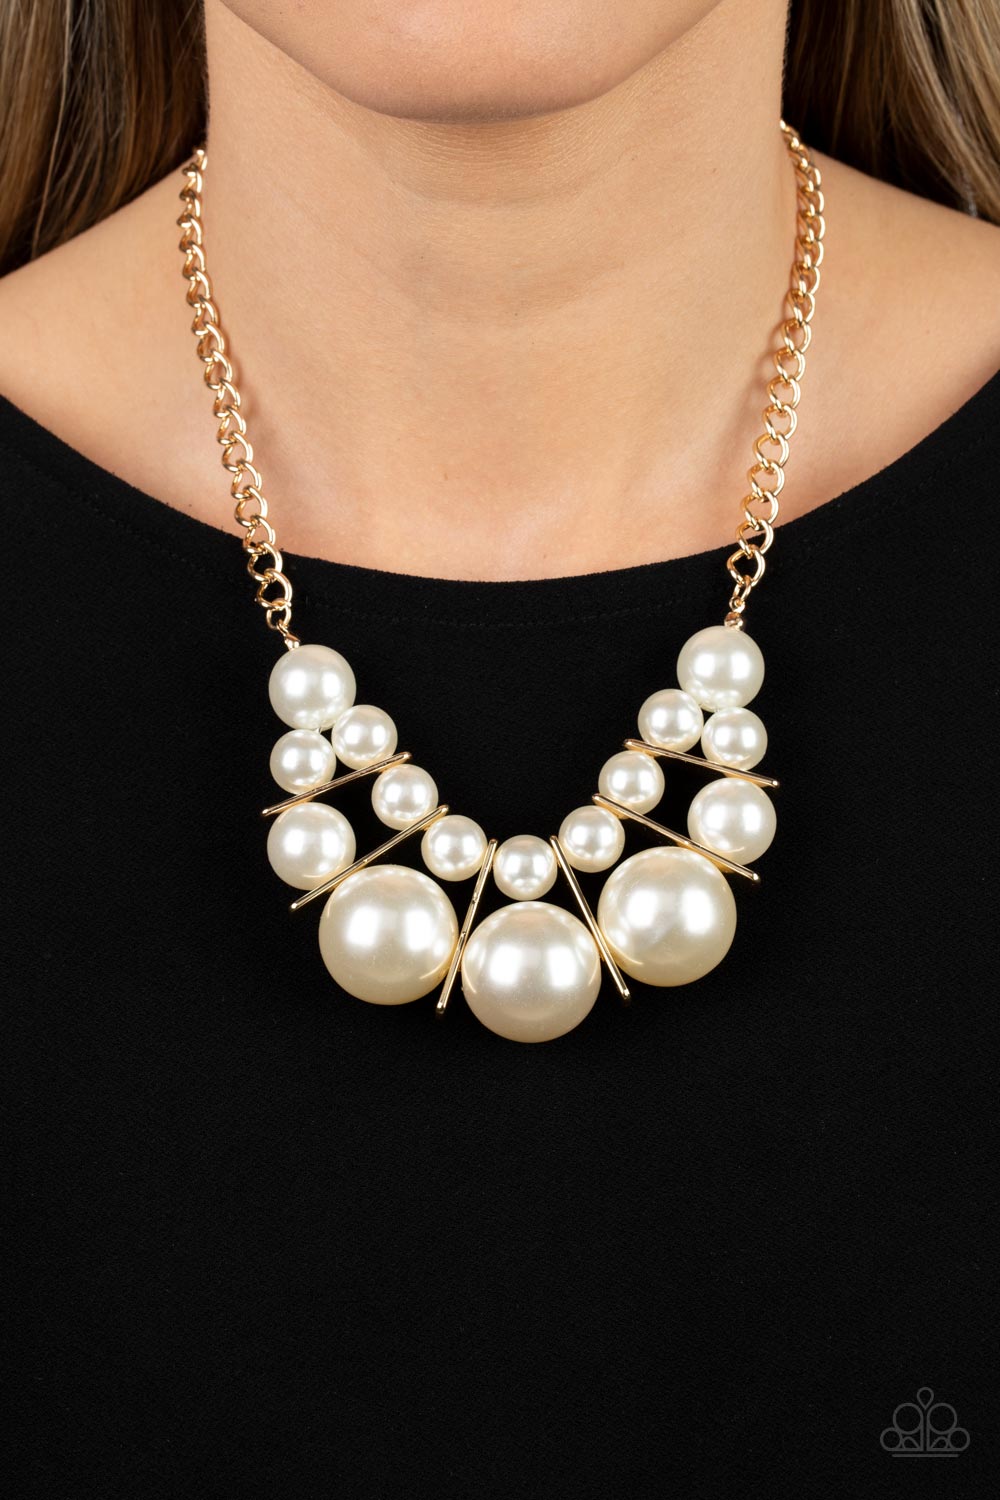 Paparazzi Accessories - Challenge Accepted - Gold Pearl Necklace separated by rectangular gold frames, bubbly rows of classic and oversized white pearls are threaded along invisible wires at the bottom of a chunky gold chain for an effervescent explosion below the collar. Features an adjustable clasp closure.  Sold as one individual necklace. Includes one pair of matching earrings.